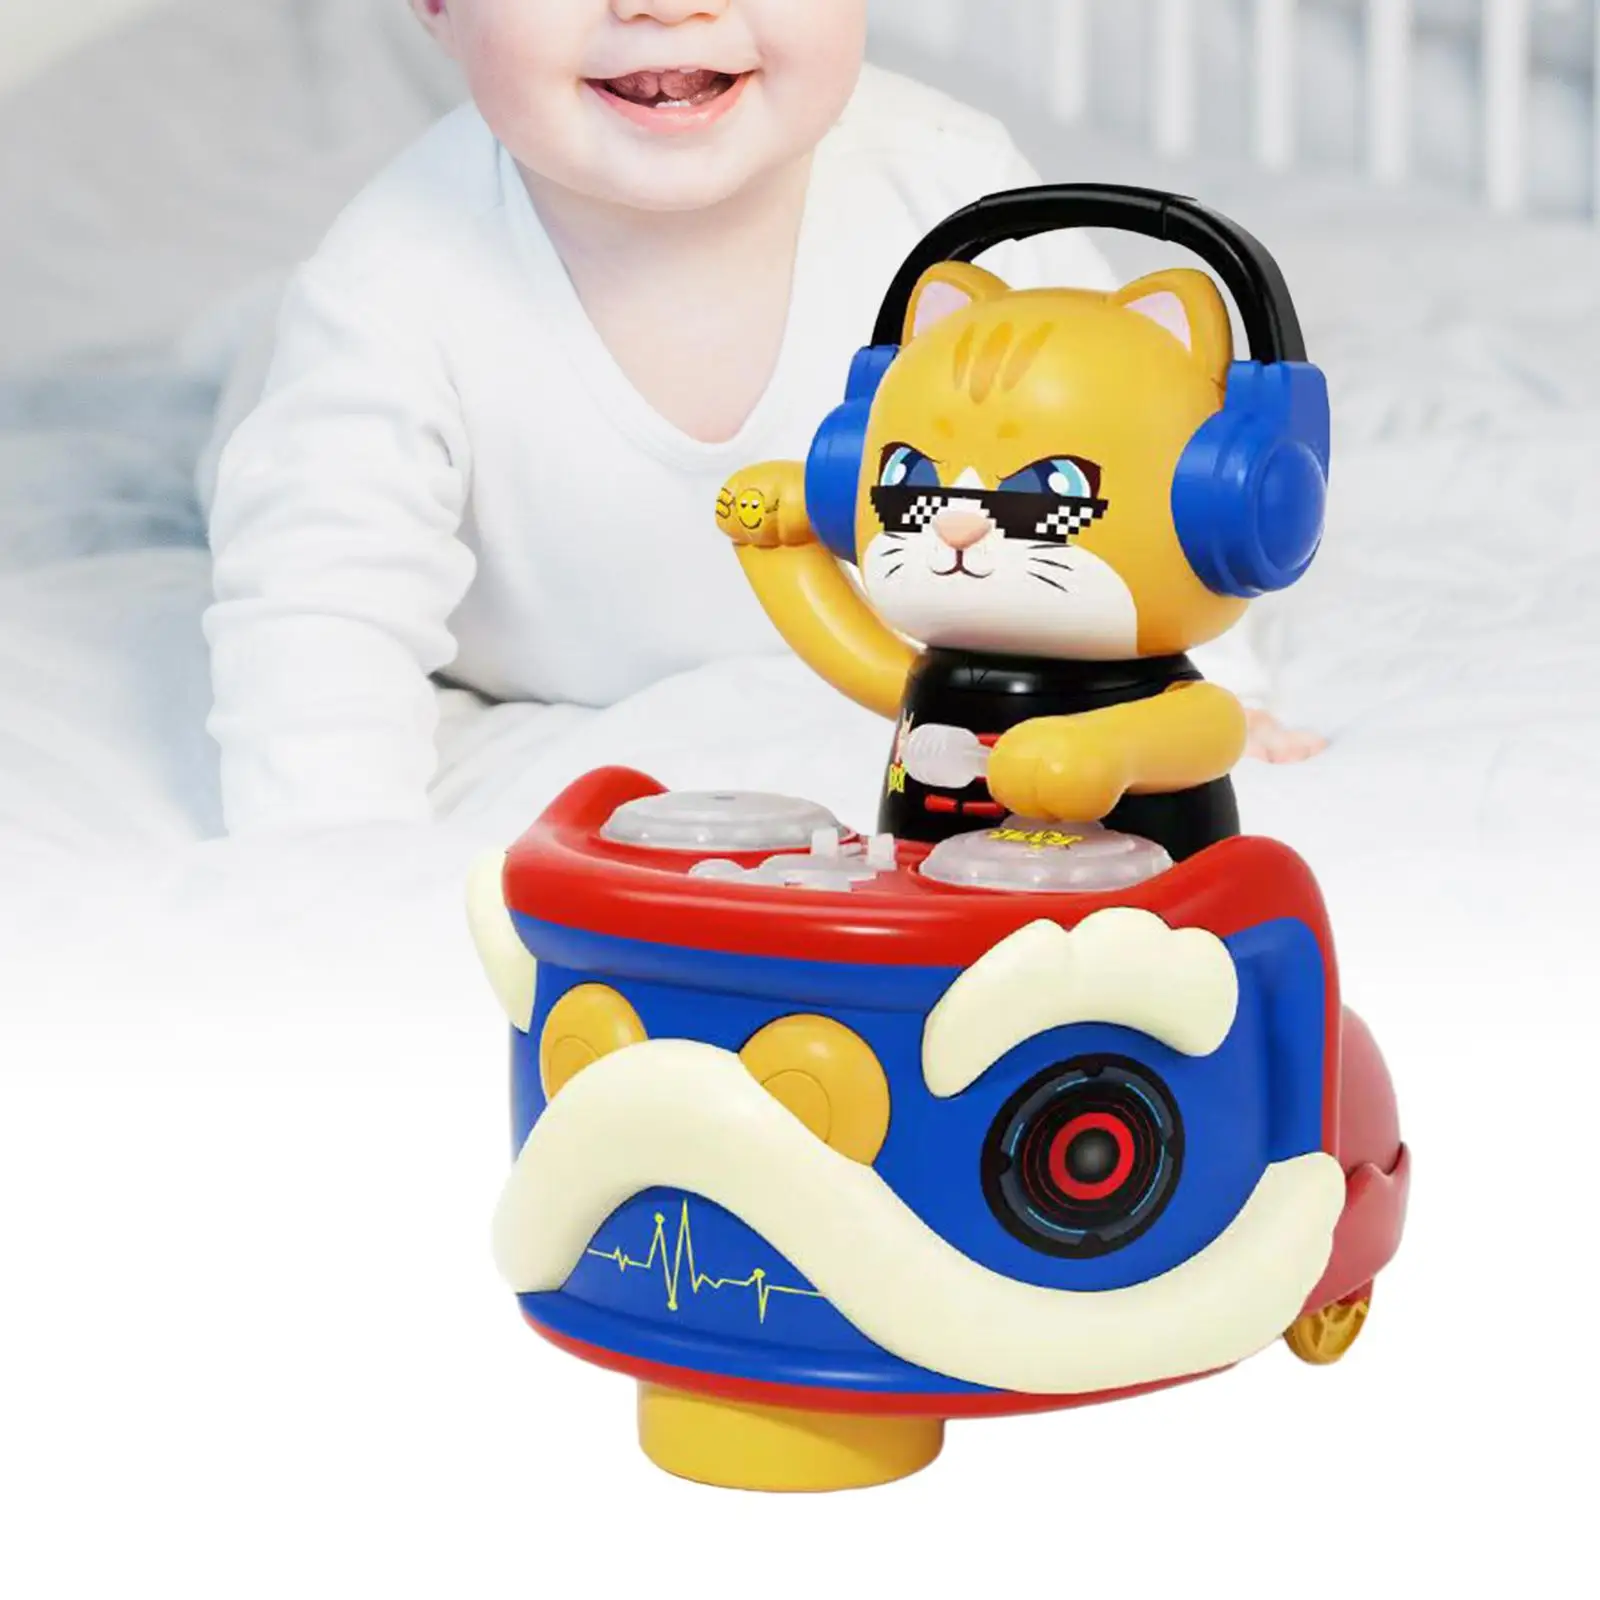 Baby Toy Electronic Pet Universal Wheel Dancing Cat Development Toy for Kindergarten Child Holiday Gift Preschool Leisure Toys